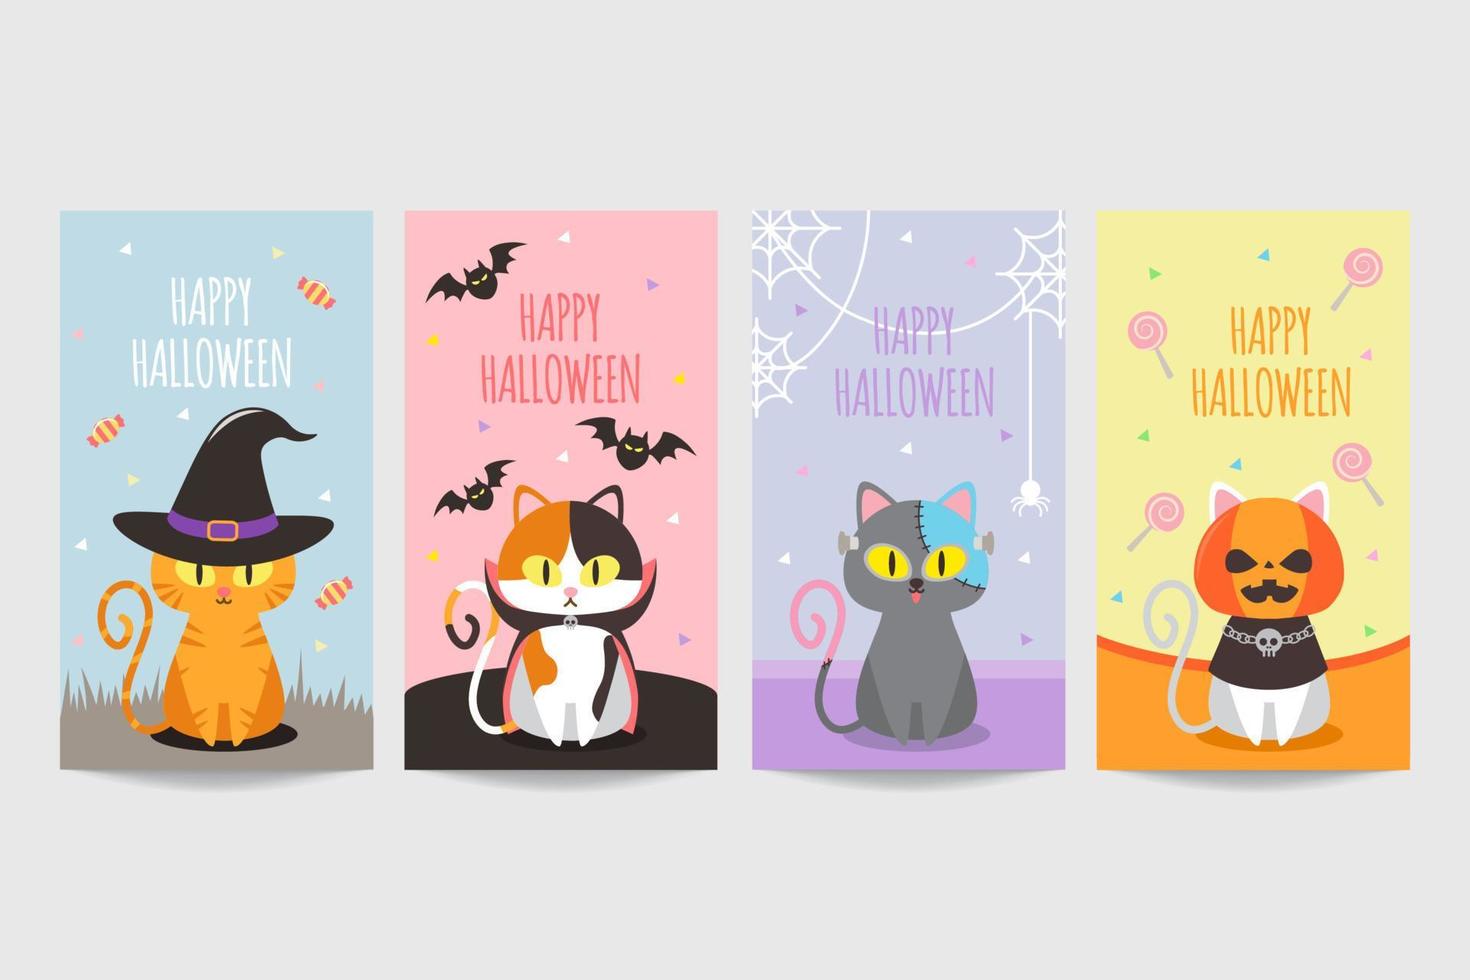 Colorful happy halloween banner with cute cat wearing costume vector